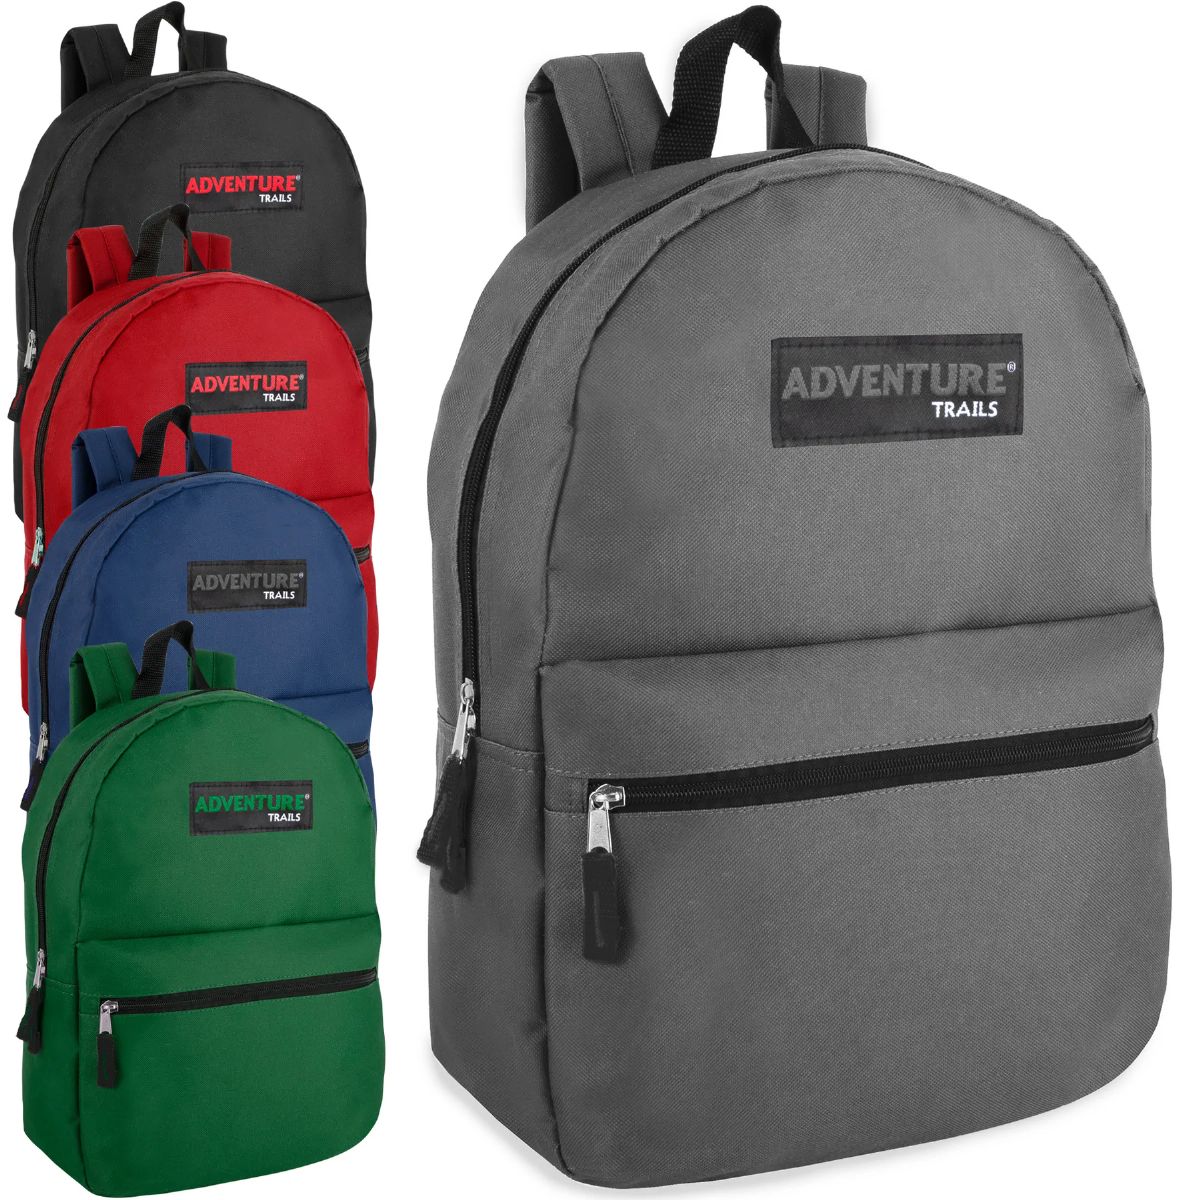 24 Pieces of Adventure Trails 17 Inch Backpack - 5 Colors